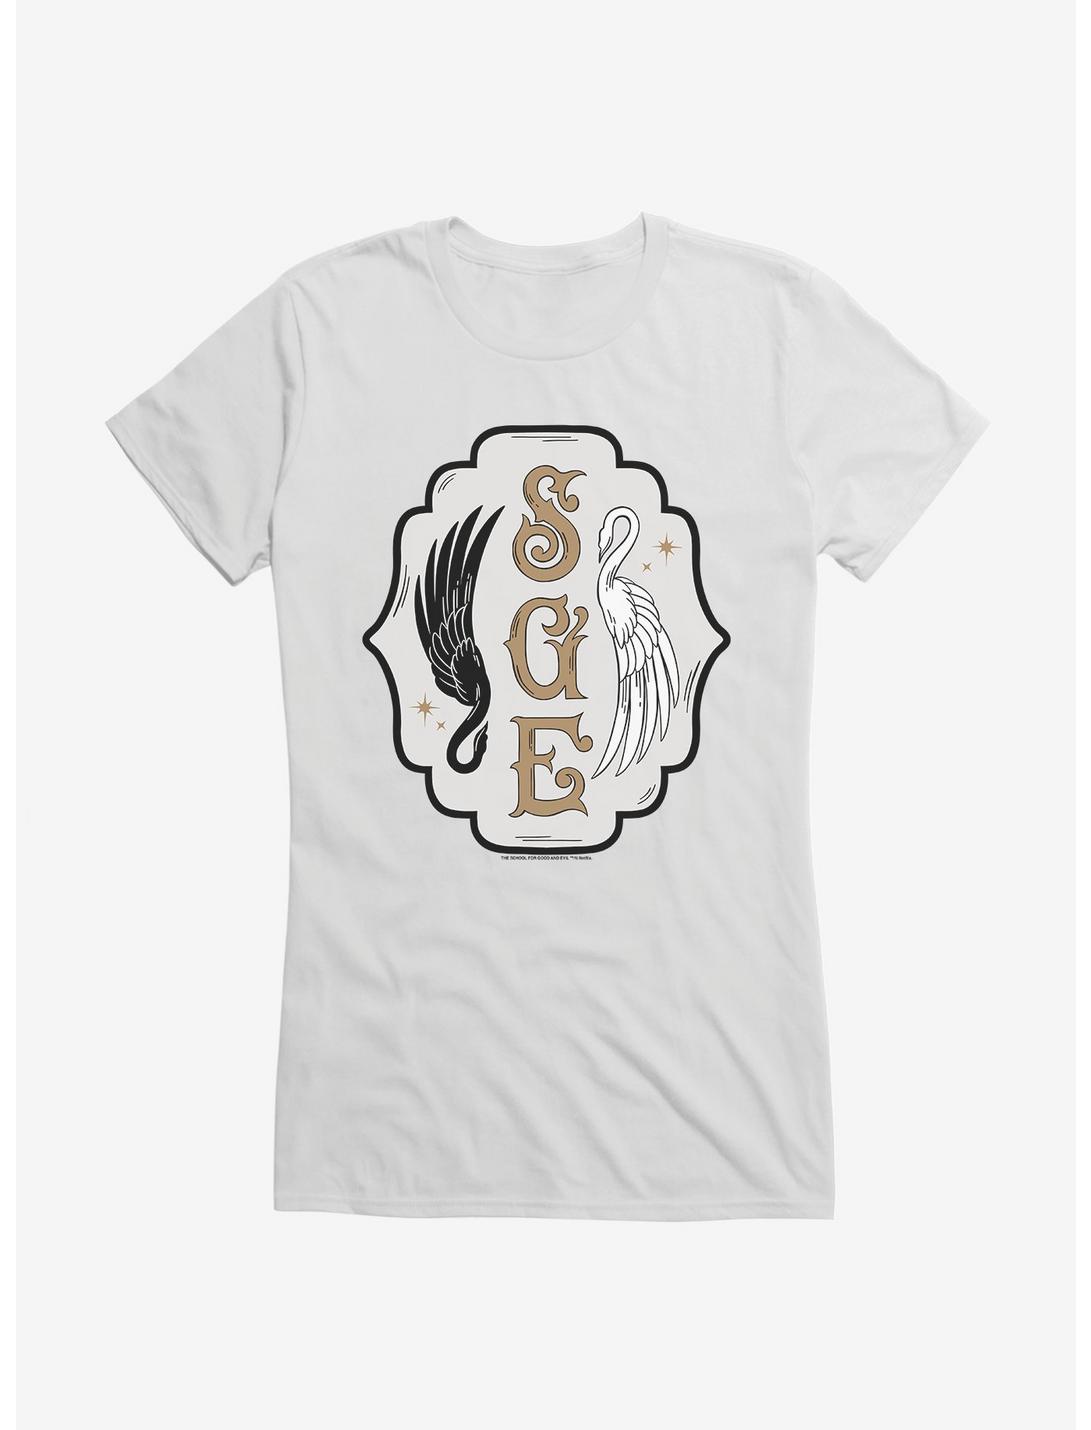 The School For Good And Evil Swan Logo Girls T-Shirt, WHITE, hi-res